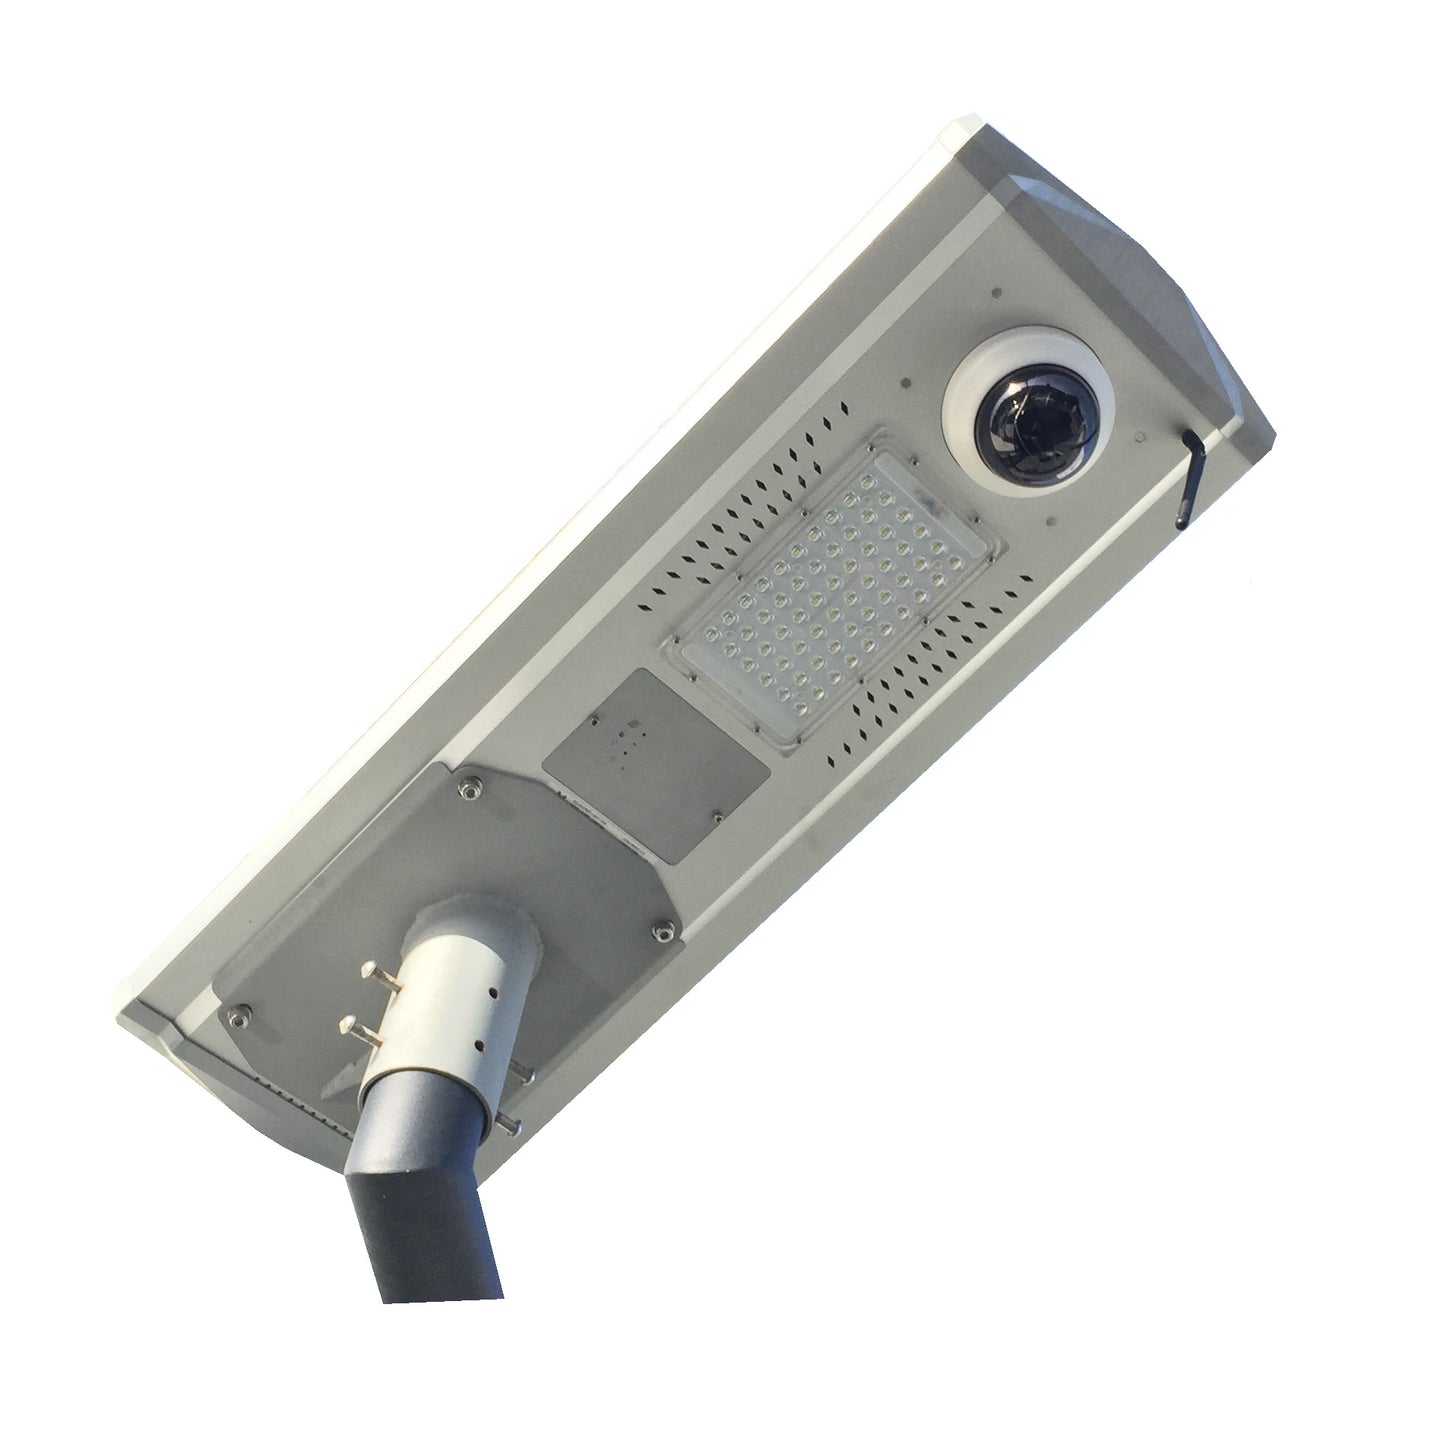 SERIES II - (All-In-One) 30W Street Light with IP Camera